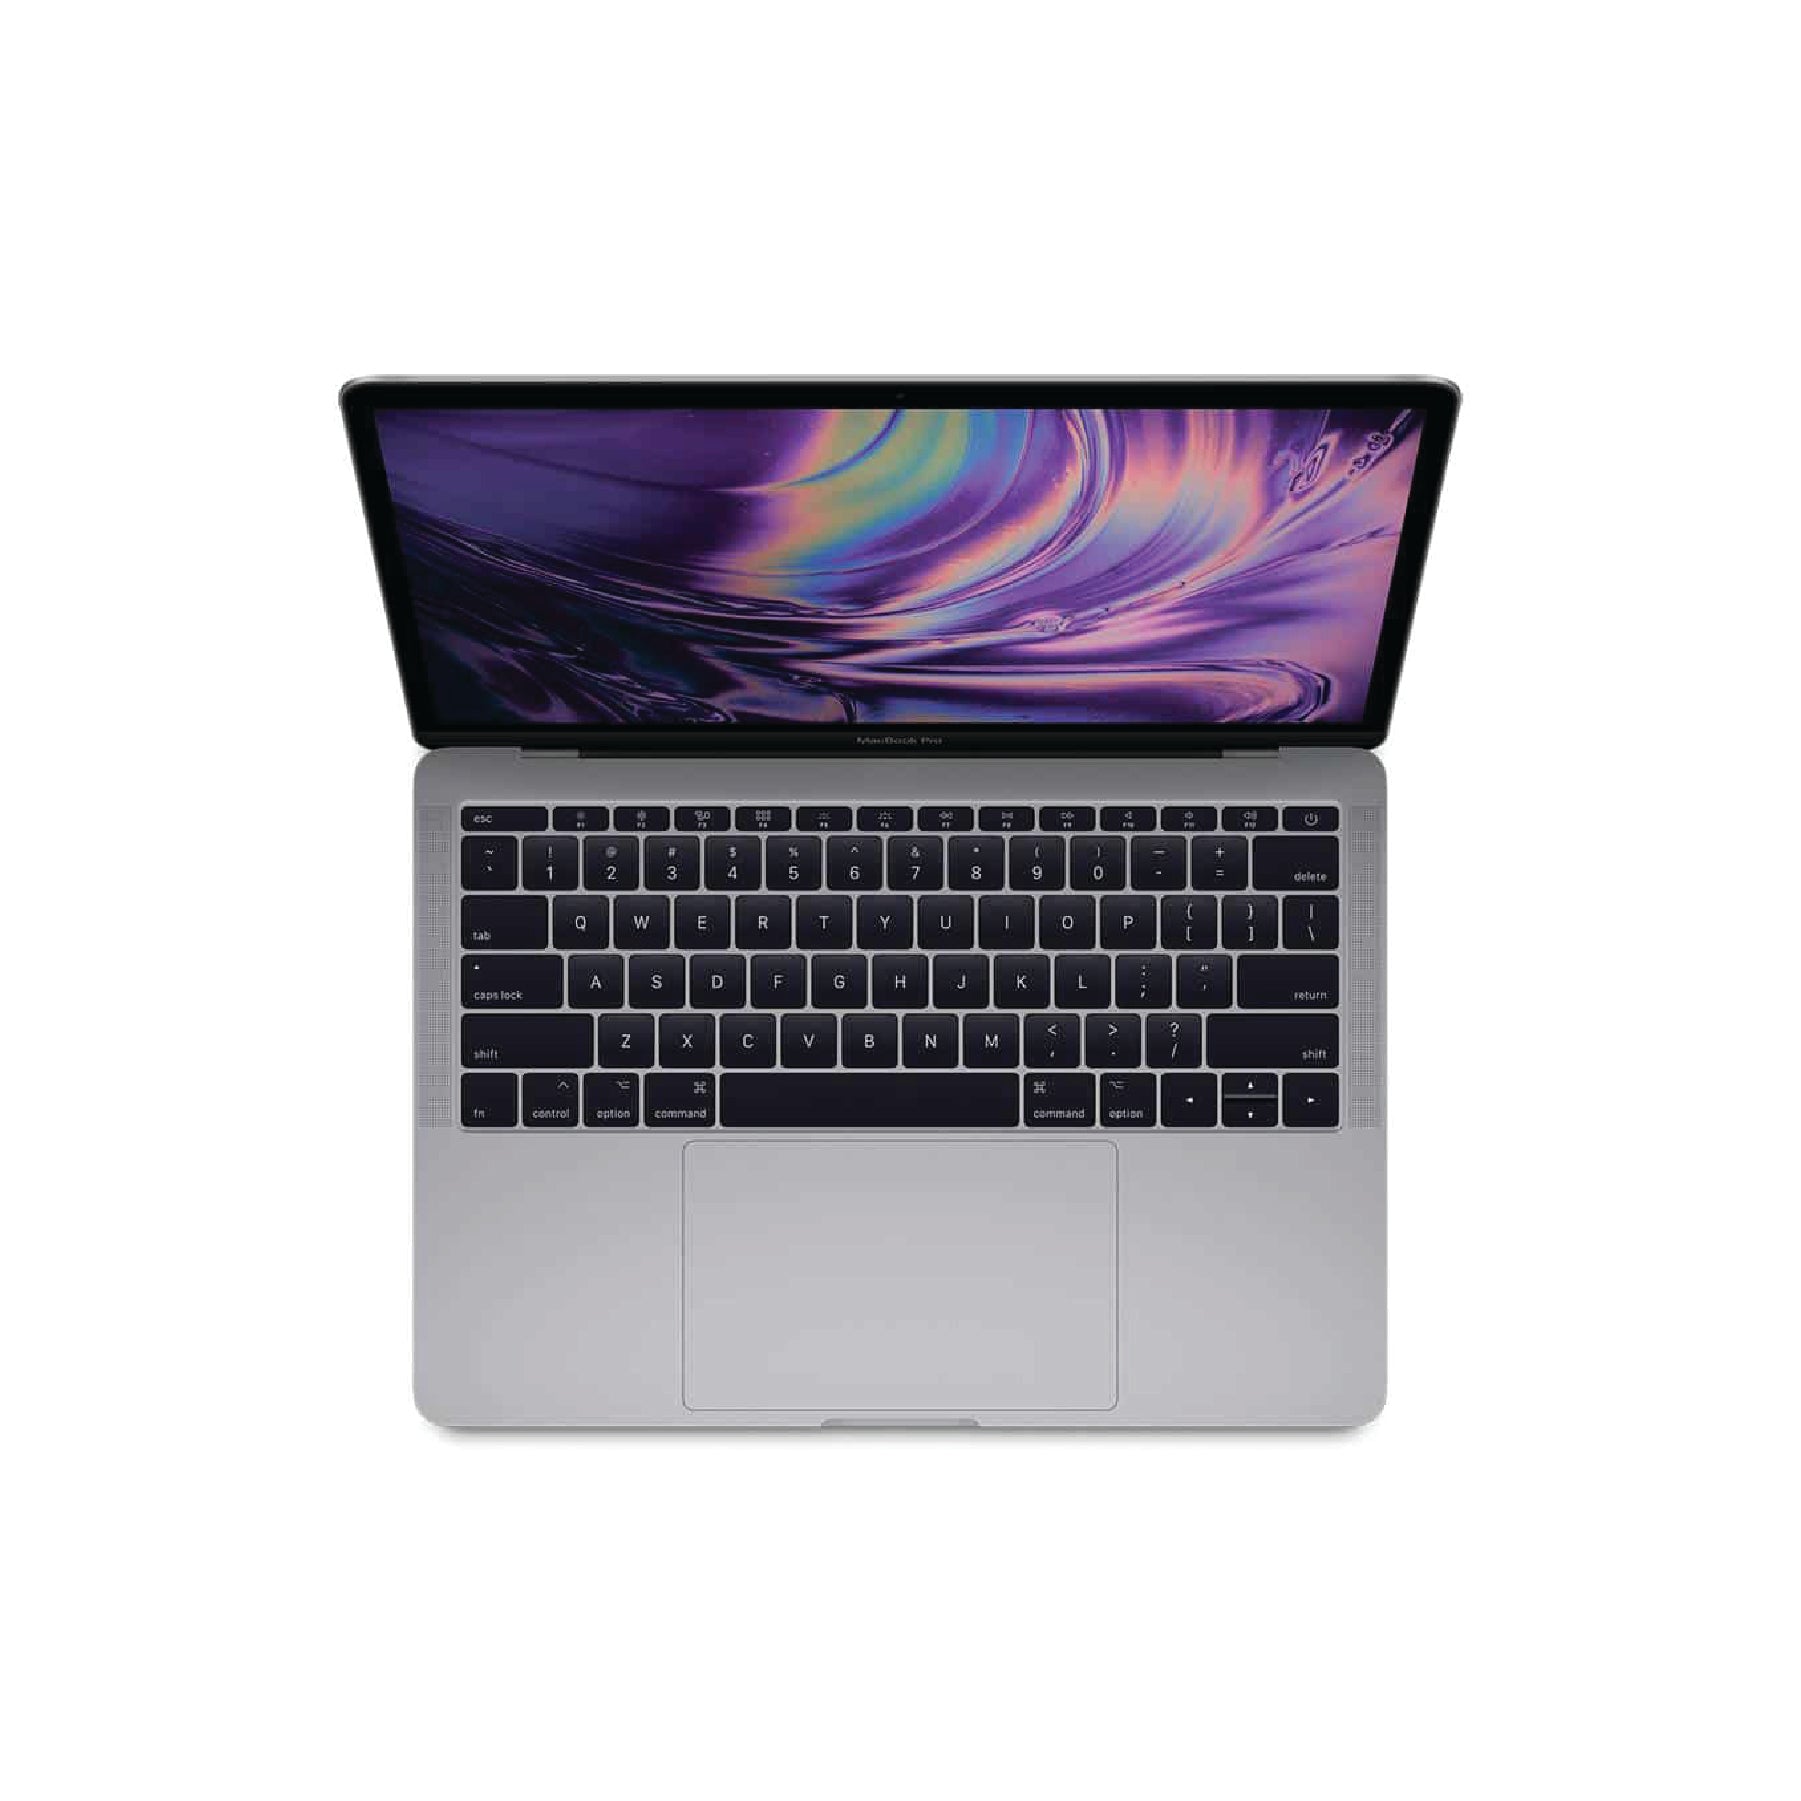 MacBook Pro (13-inch, 2016, Two Thunderbolt 3 ports) 2.0GHz, Intel Core i5, 256GB - Space Grey (Better) - iStore Pre-owned